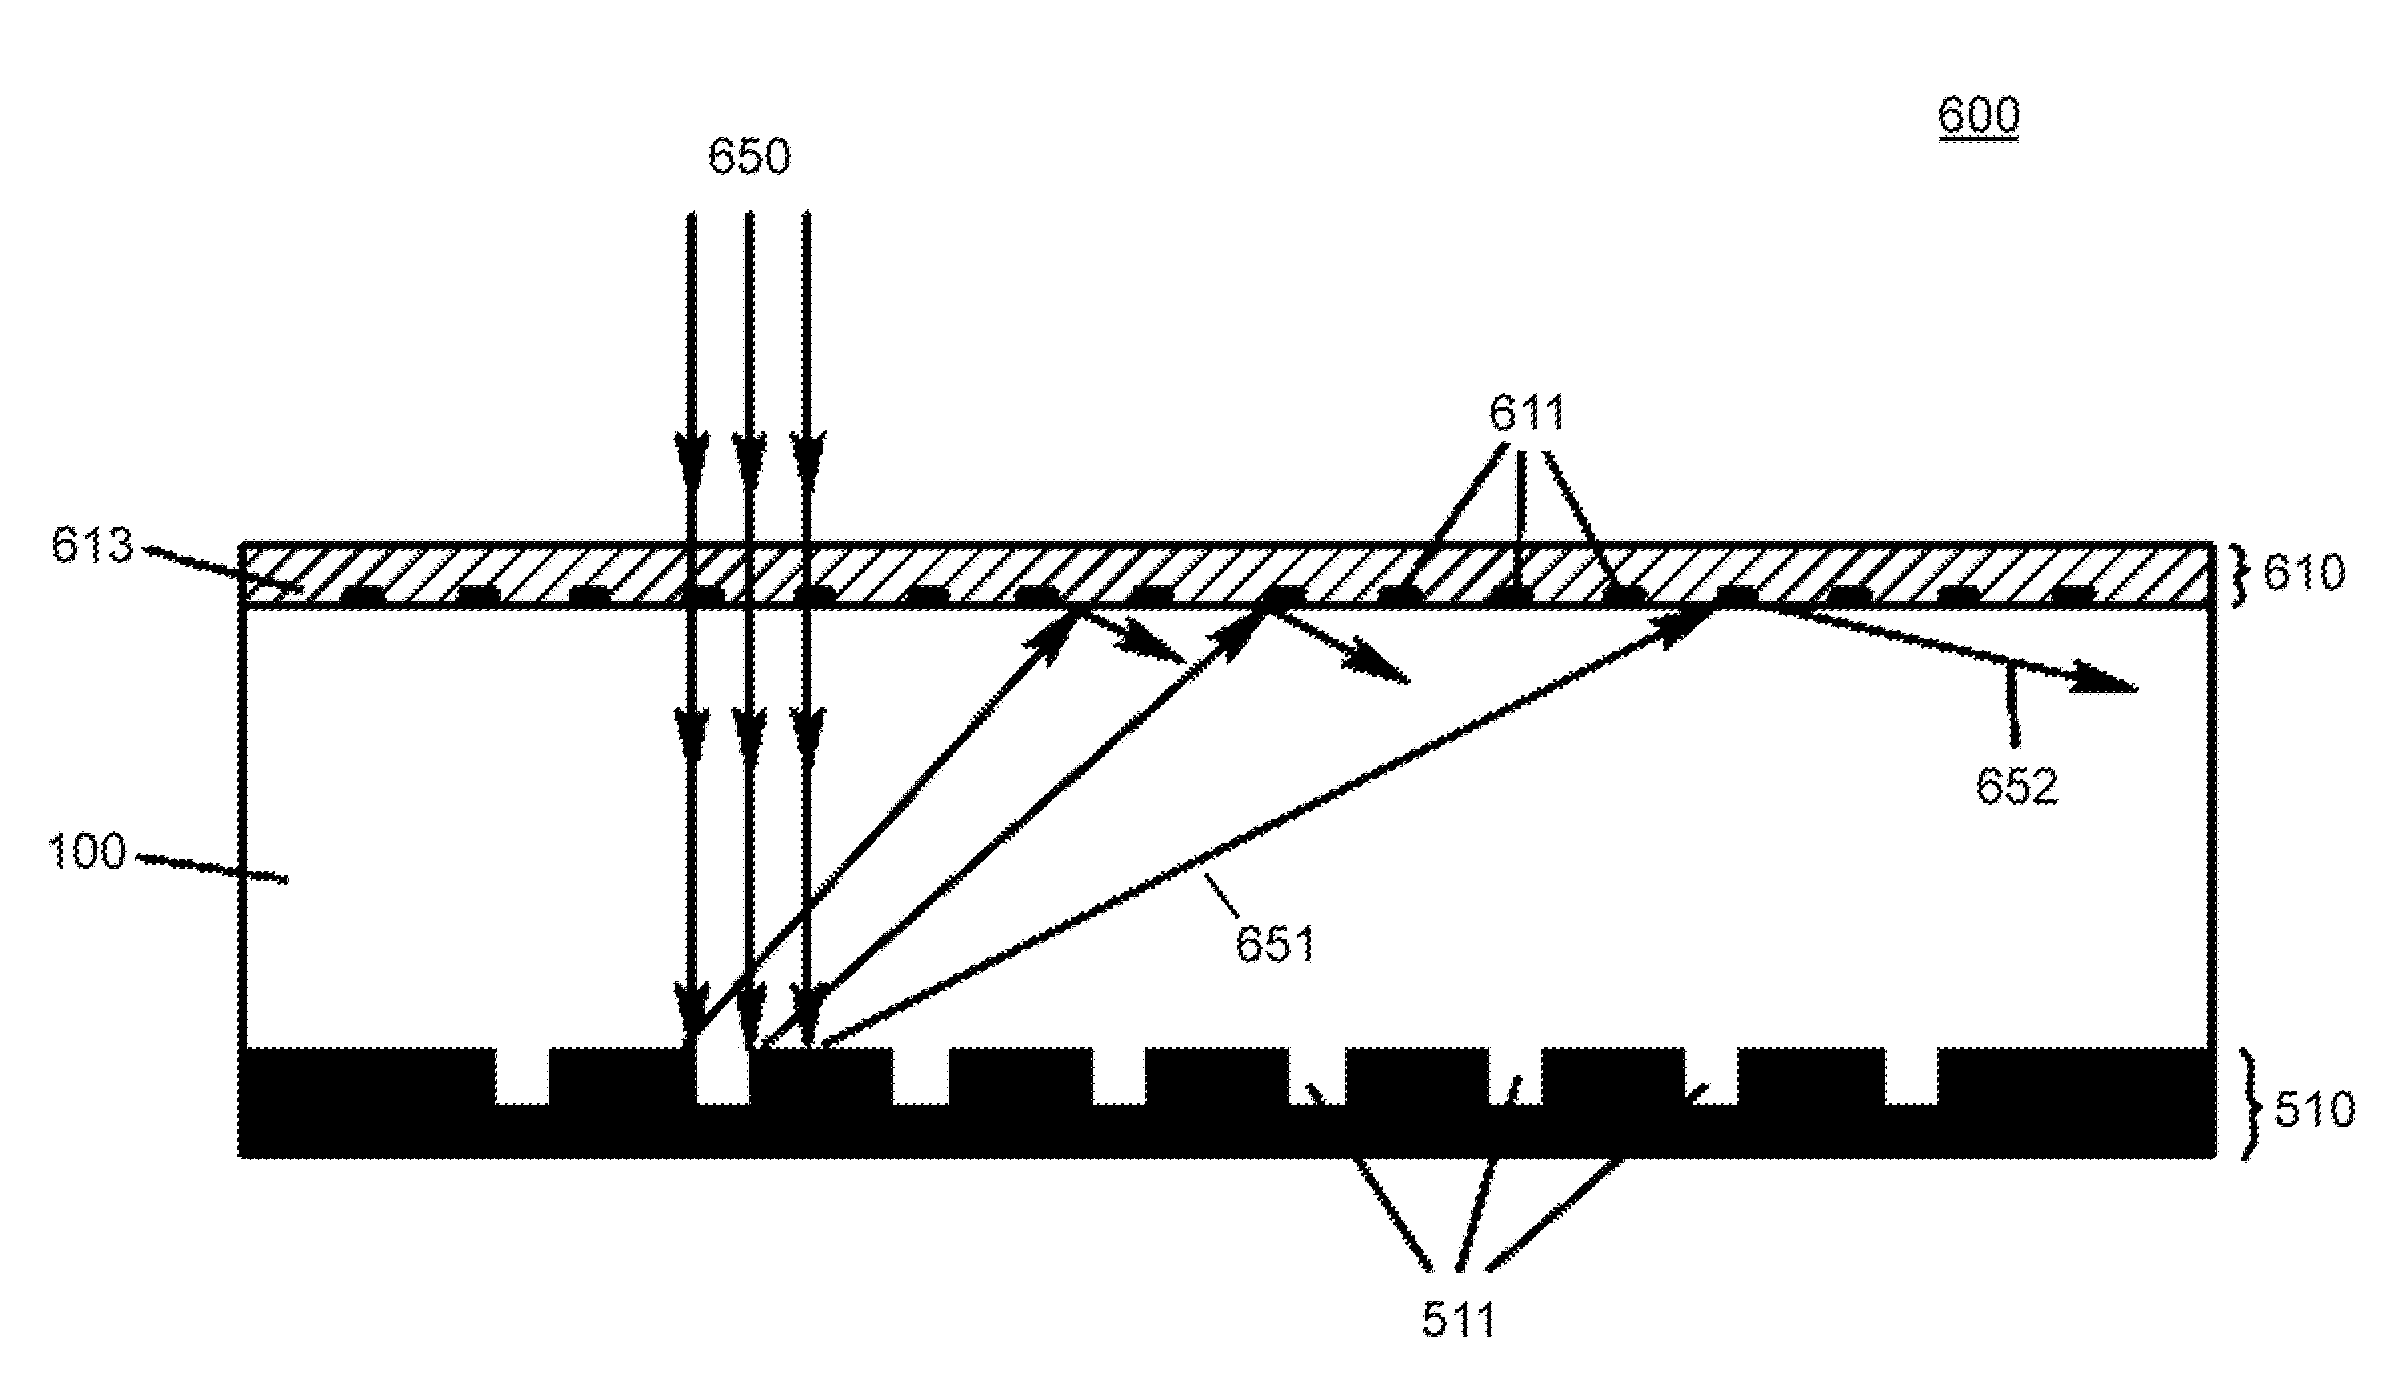 Planar plasmonic device for light reflection, diffusion and guiding